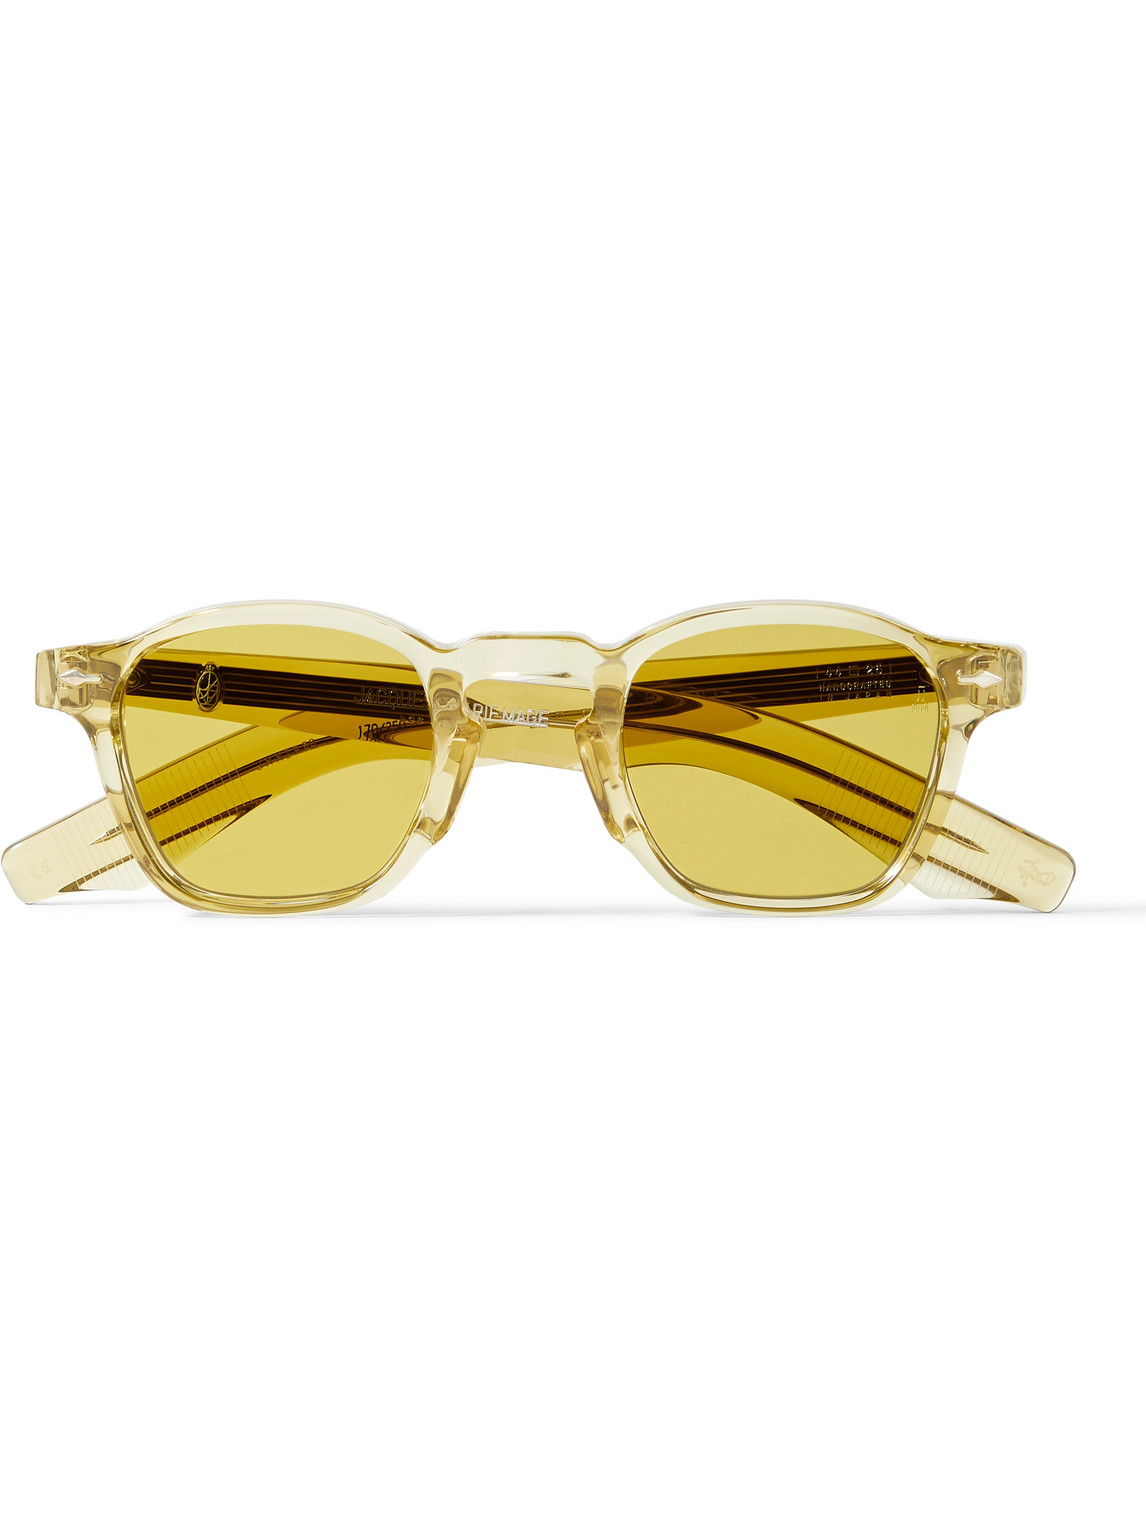 Jacques Marie Mage Zephirin D-frame Acetate Sunglasses In Yellow